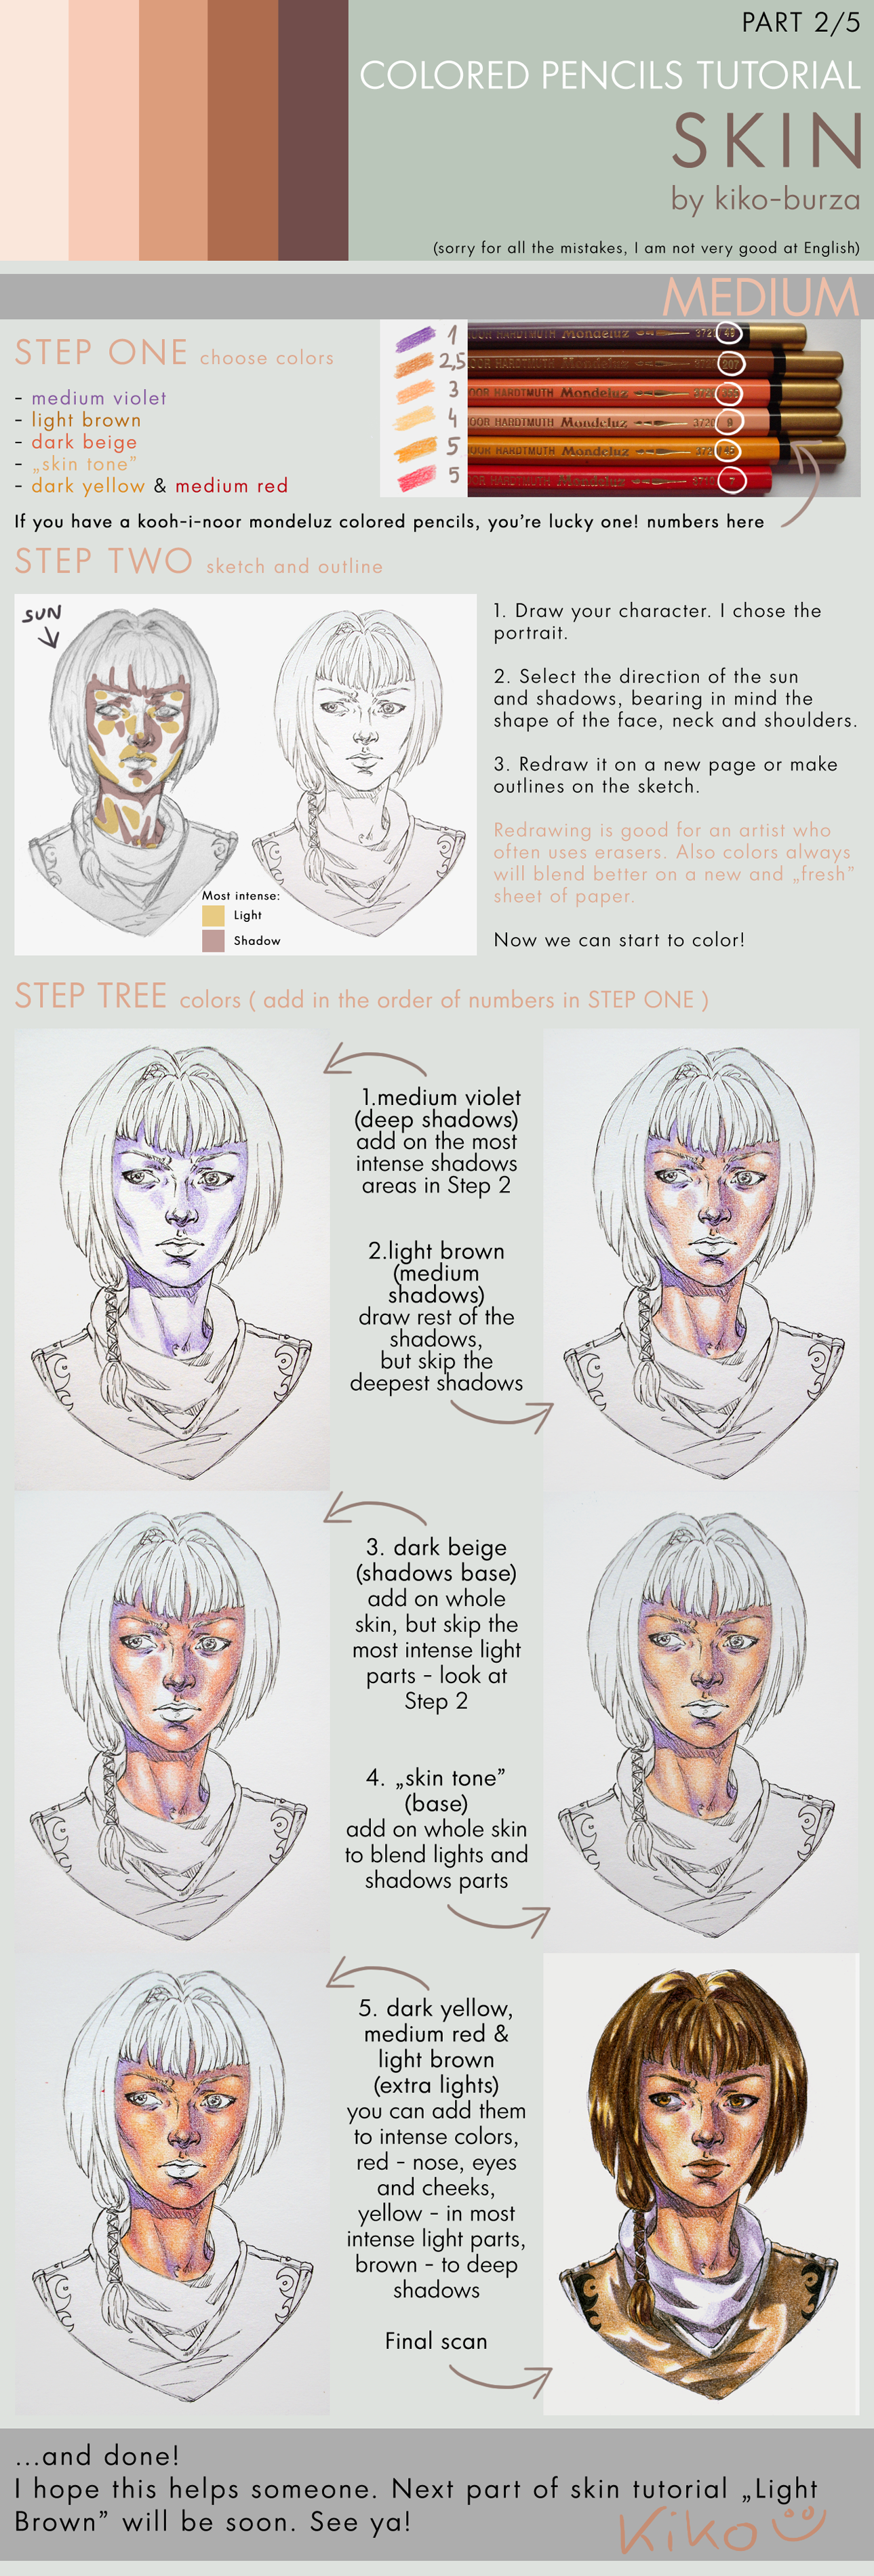 Quick Tutorial - How to Color a Base in Kleki